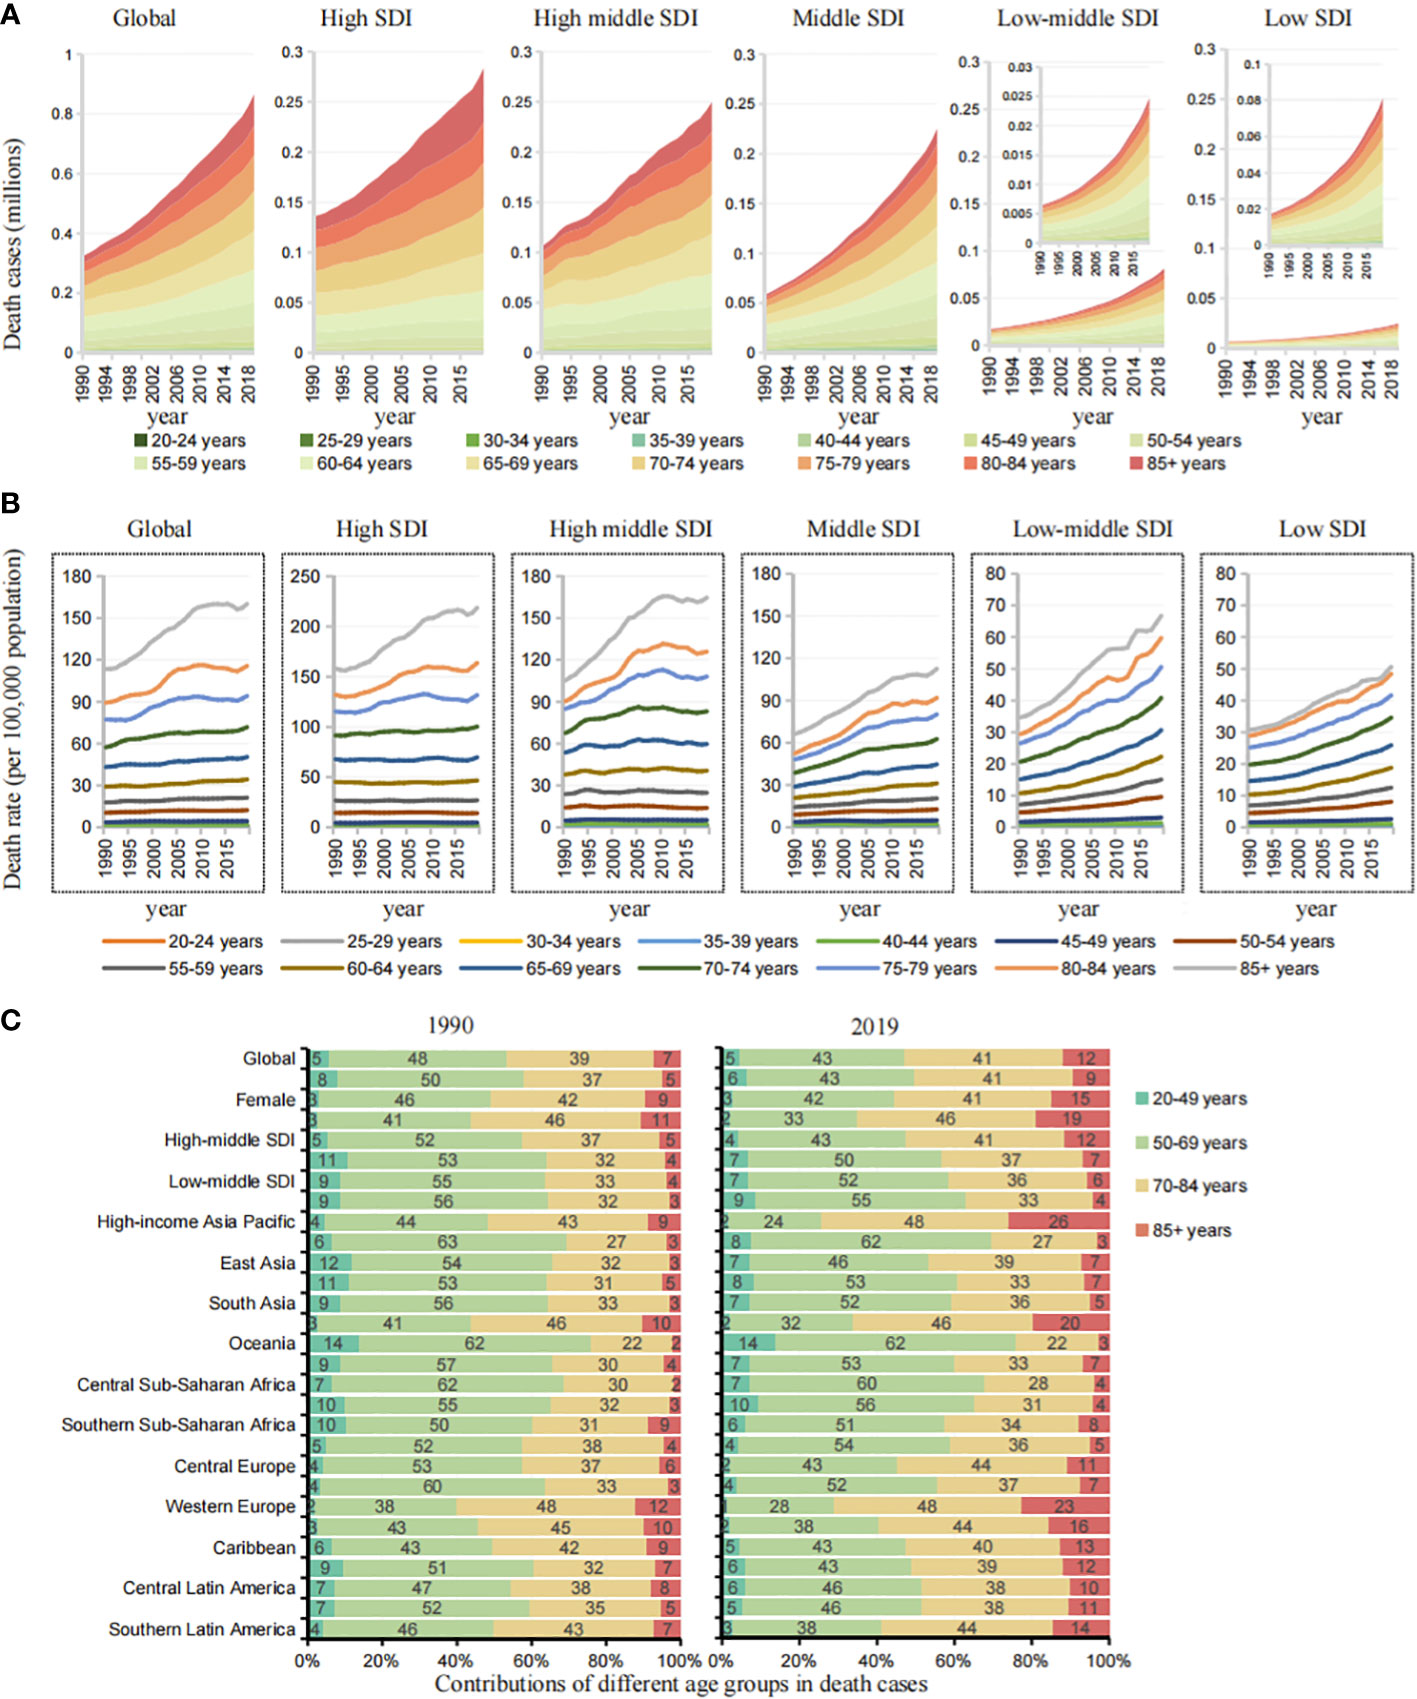 Frontiers Emerging Patterns And Trends In Global Cancer Burden Attributable To Metabolic